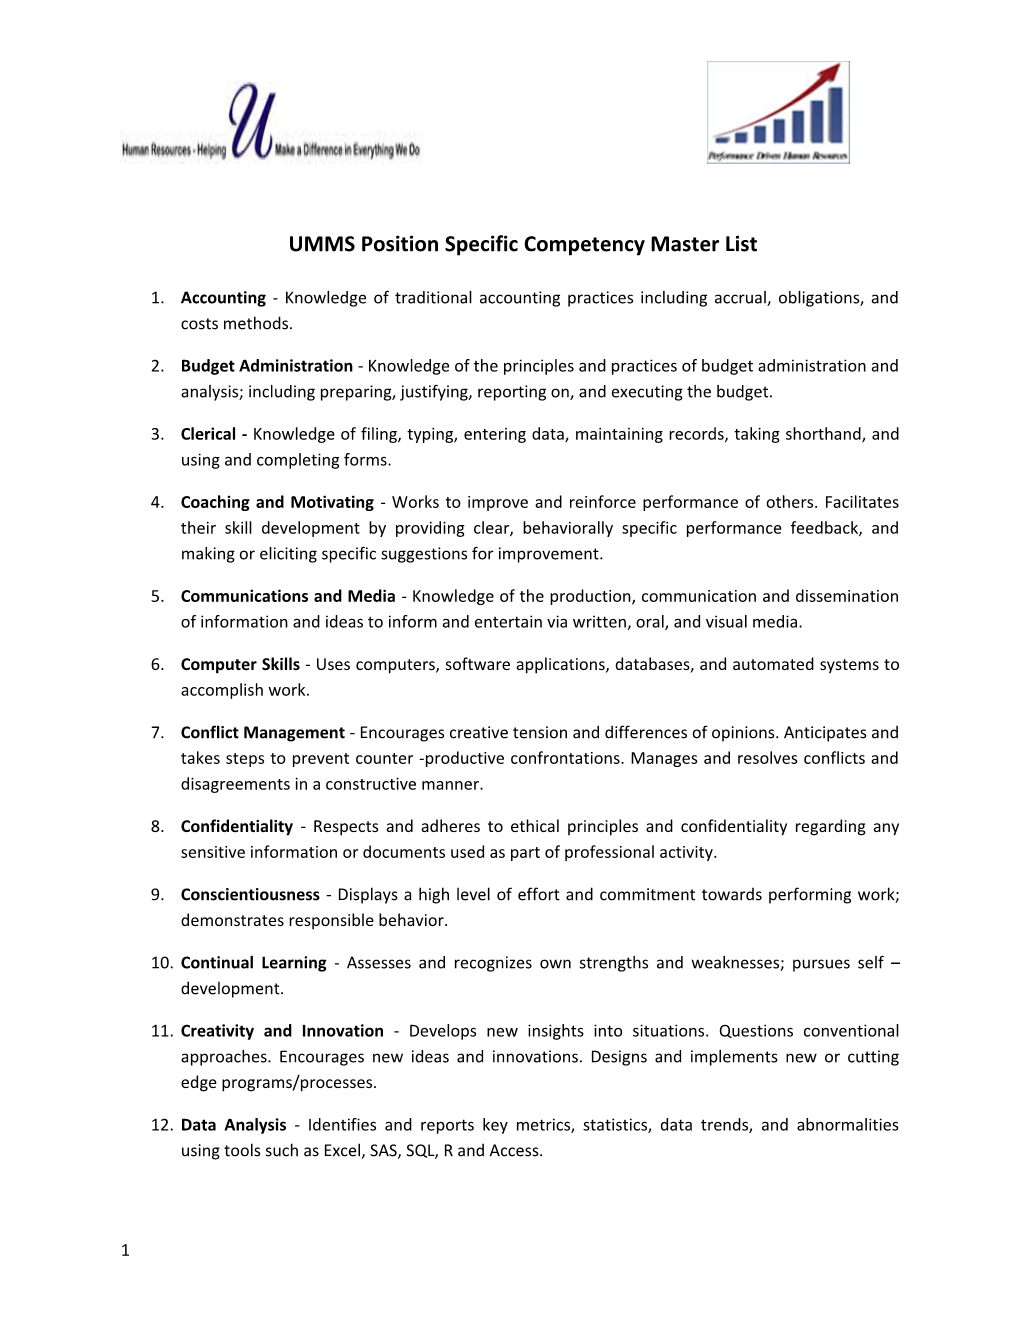 UMMS Position Specific Competency Master List